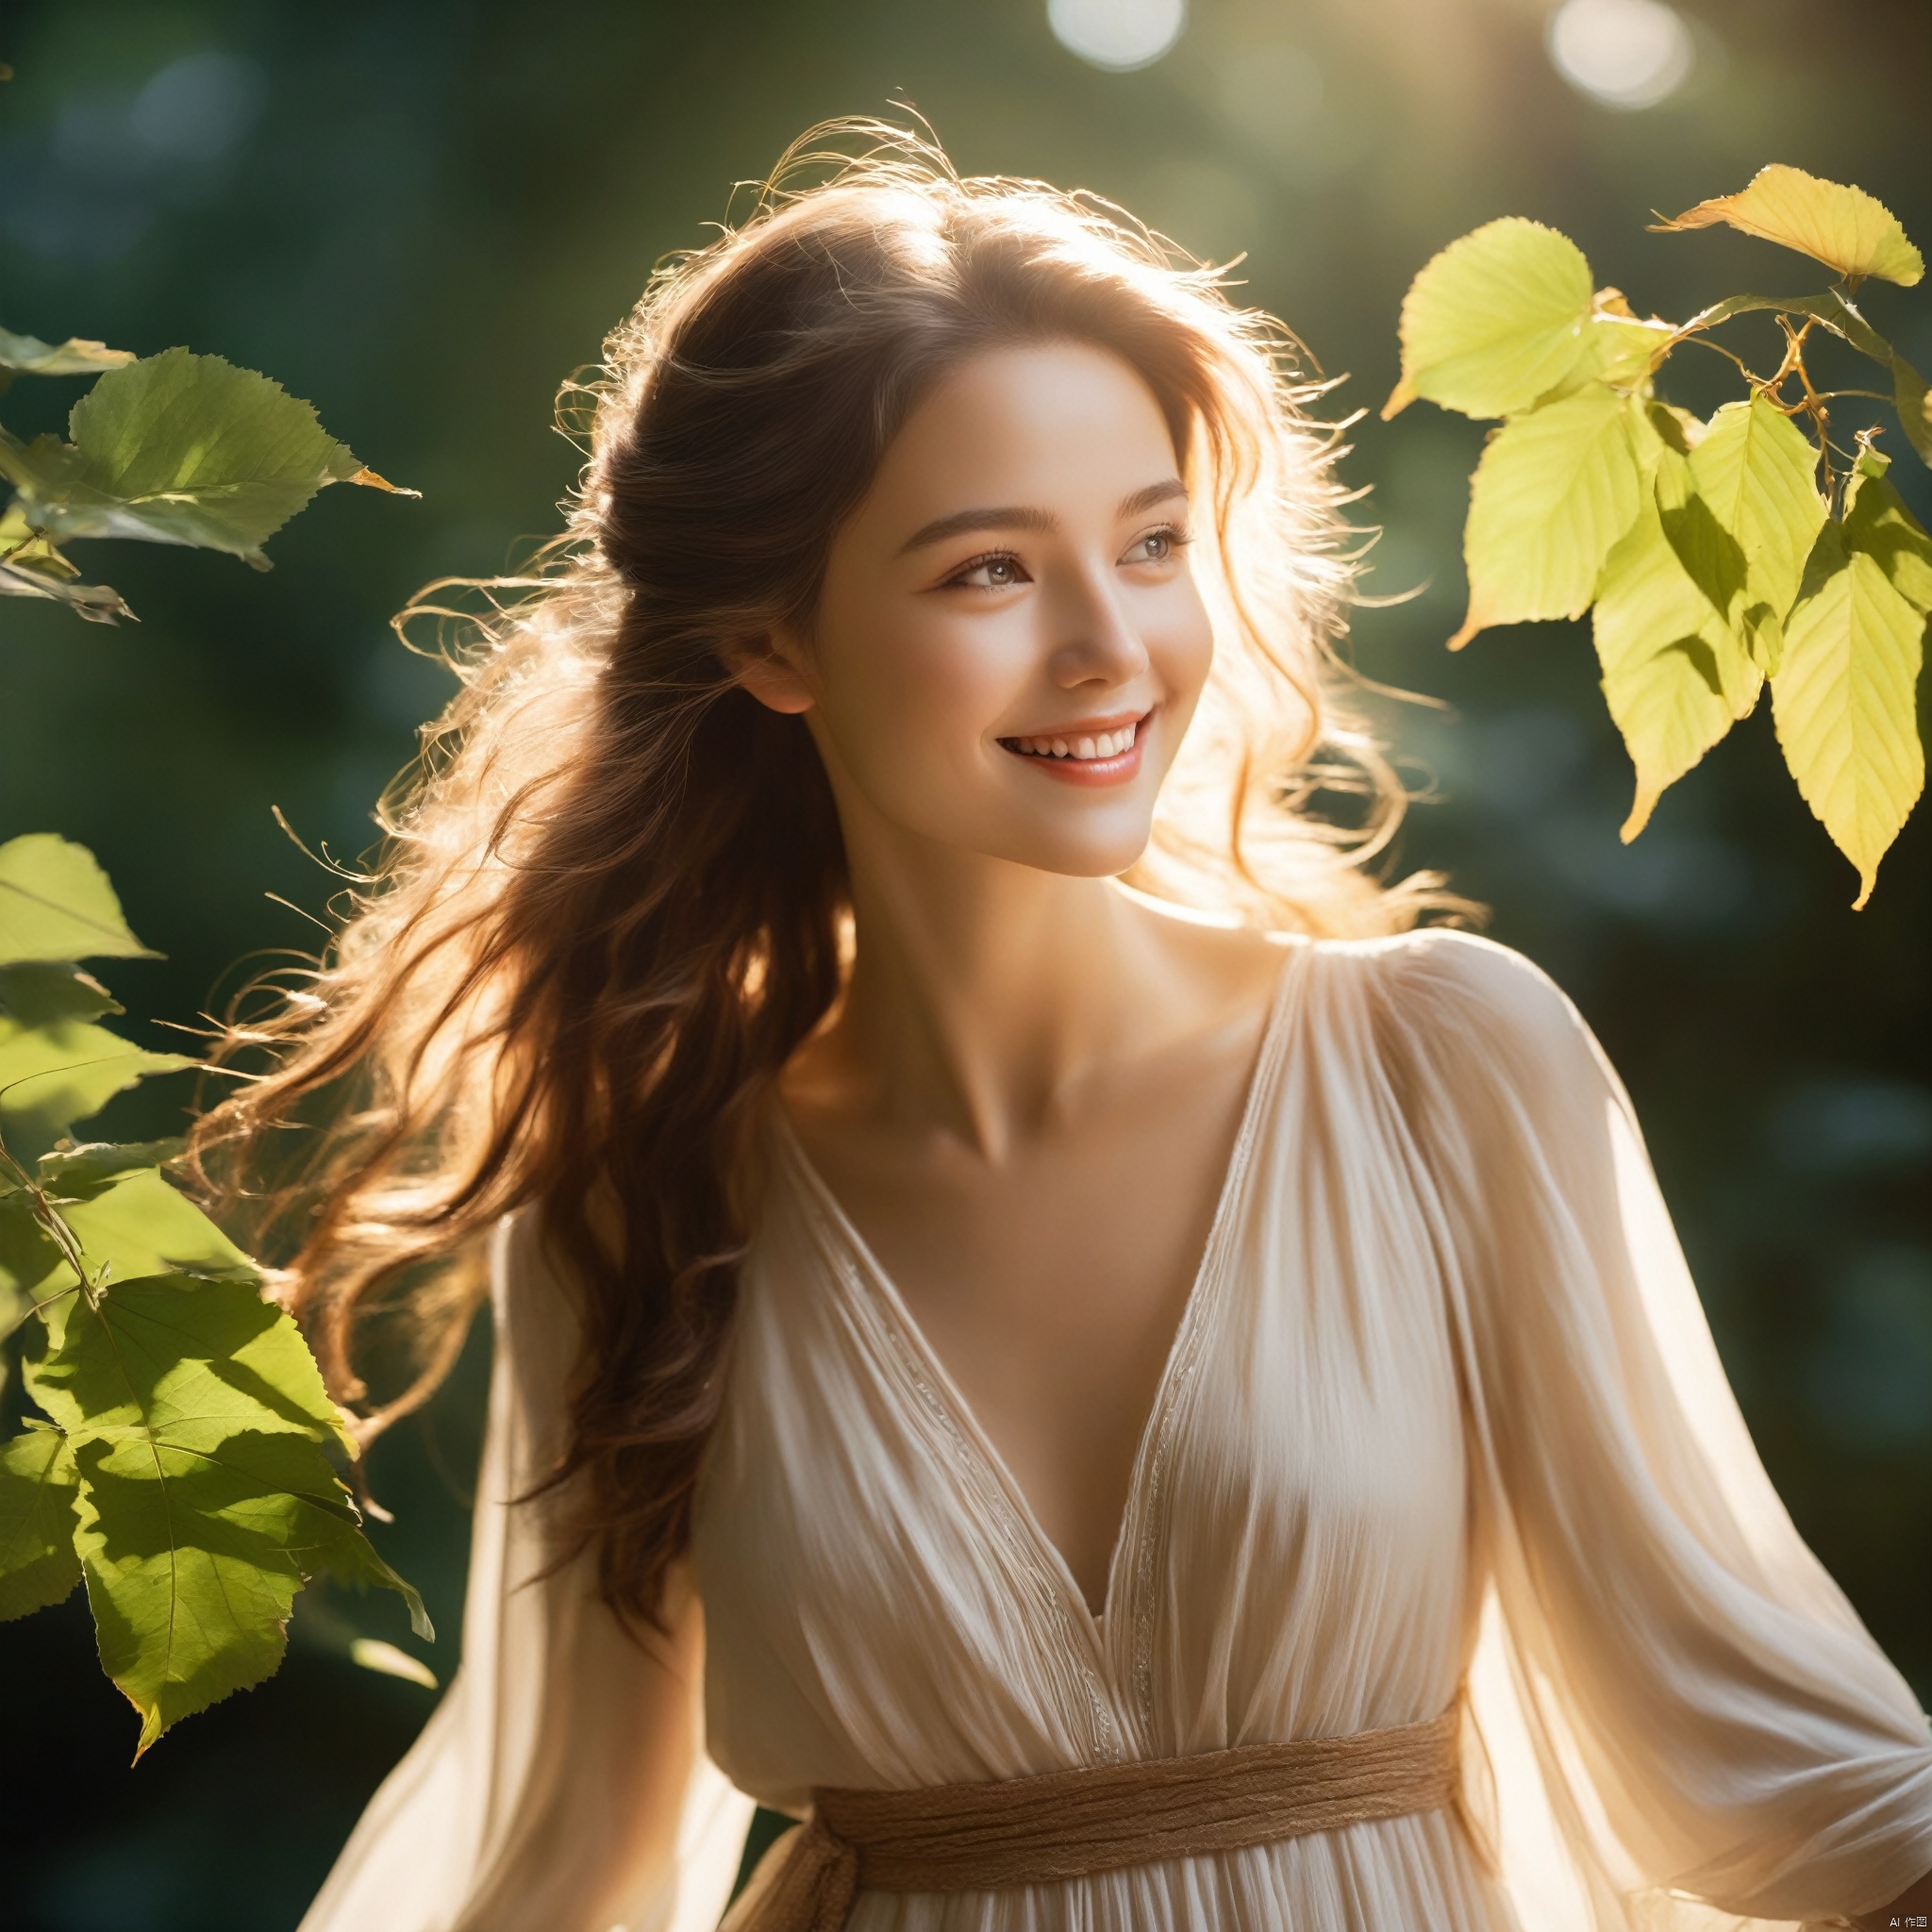 A young woman with a gentle and sweet smile, her eyes twinkling with wisdom. Her hair flows smoothly over her shoulders, gently swaying with the breeze. She wears a light, flowing dress, the hem swaying softly with her steps. Sunlight filters through the gaps in the leaves, casting a soft glow on her skin.